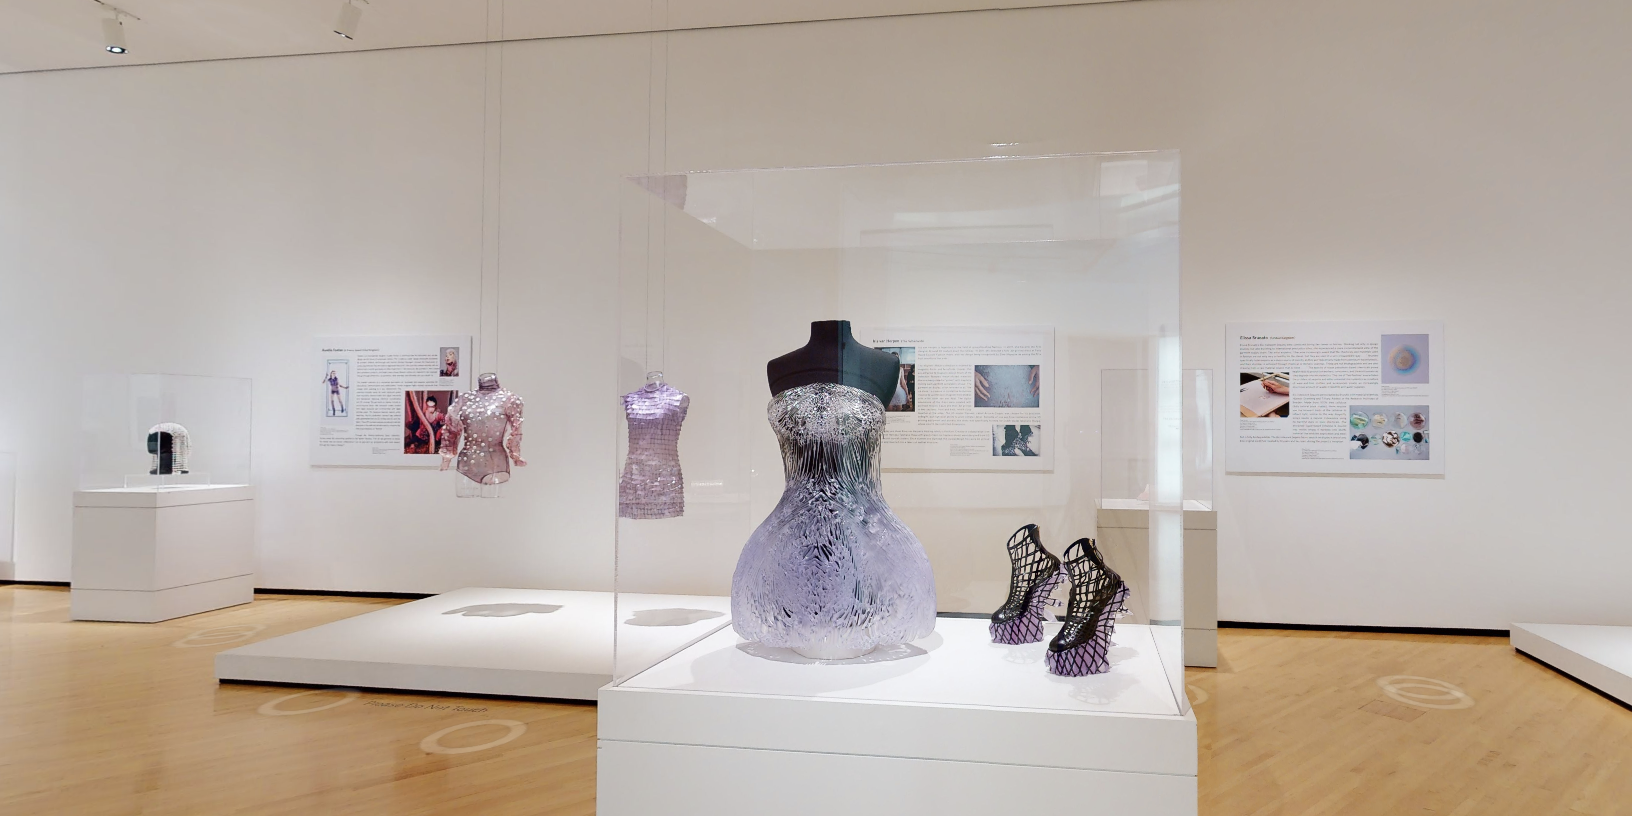 TECH-COUTURE: FASHION IN THE DIGITAL AGE